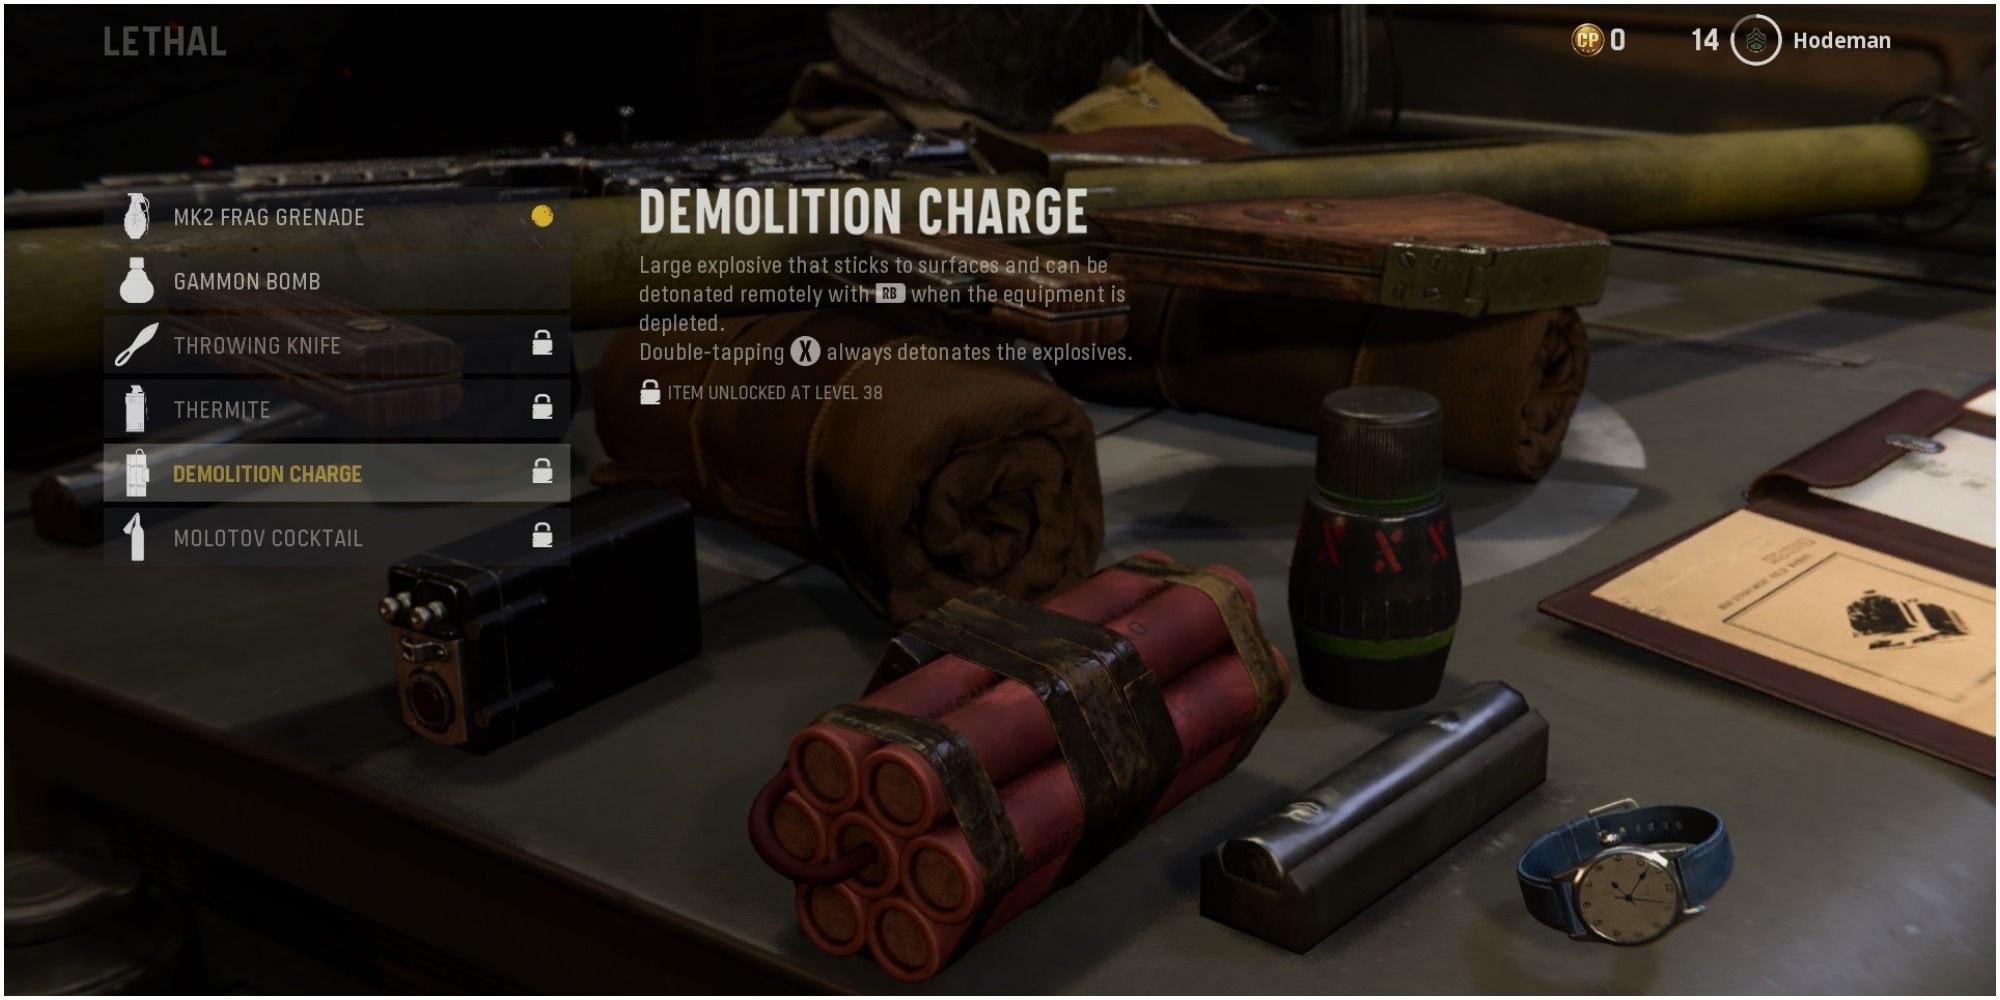 Call Of Duty Vanguard Looking At The Demolition Charge